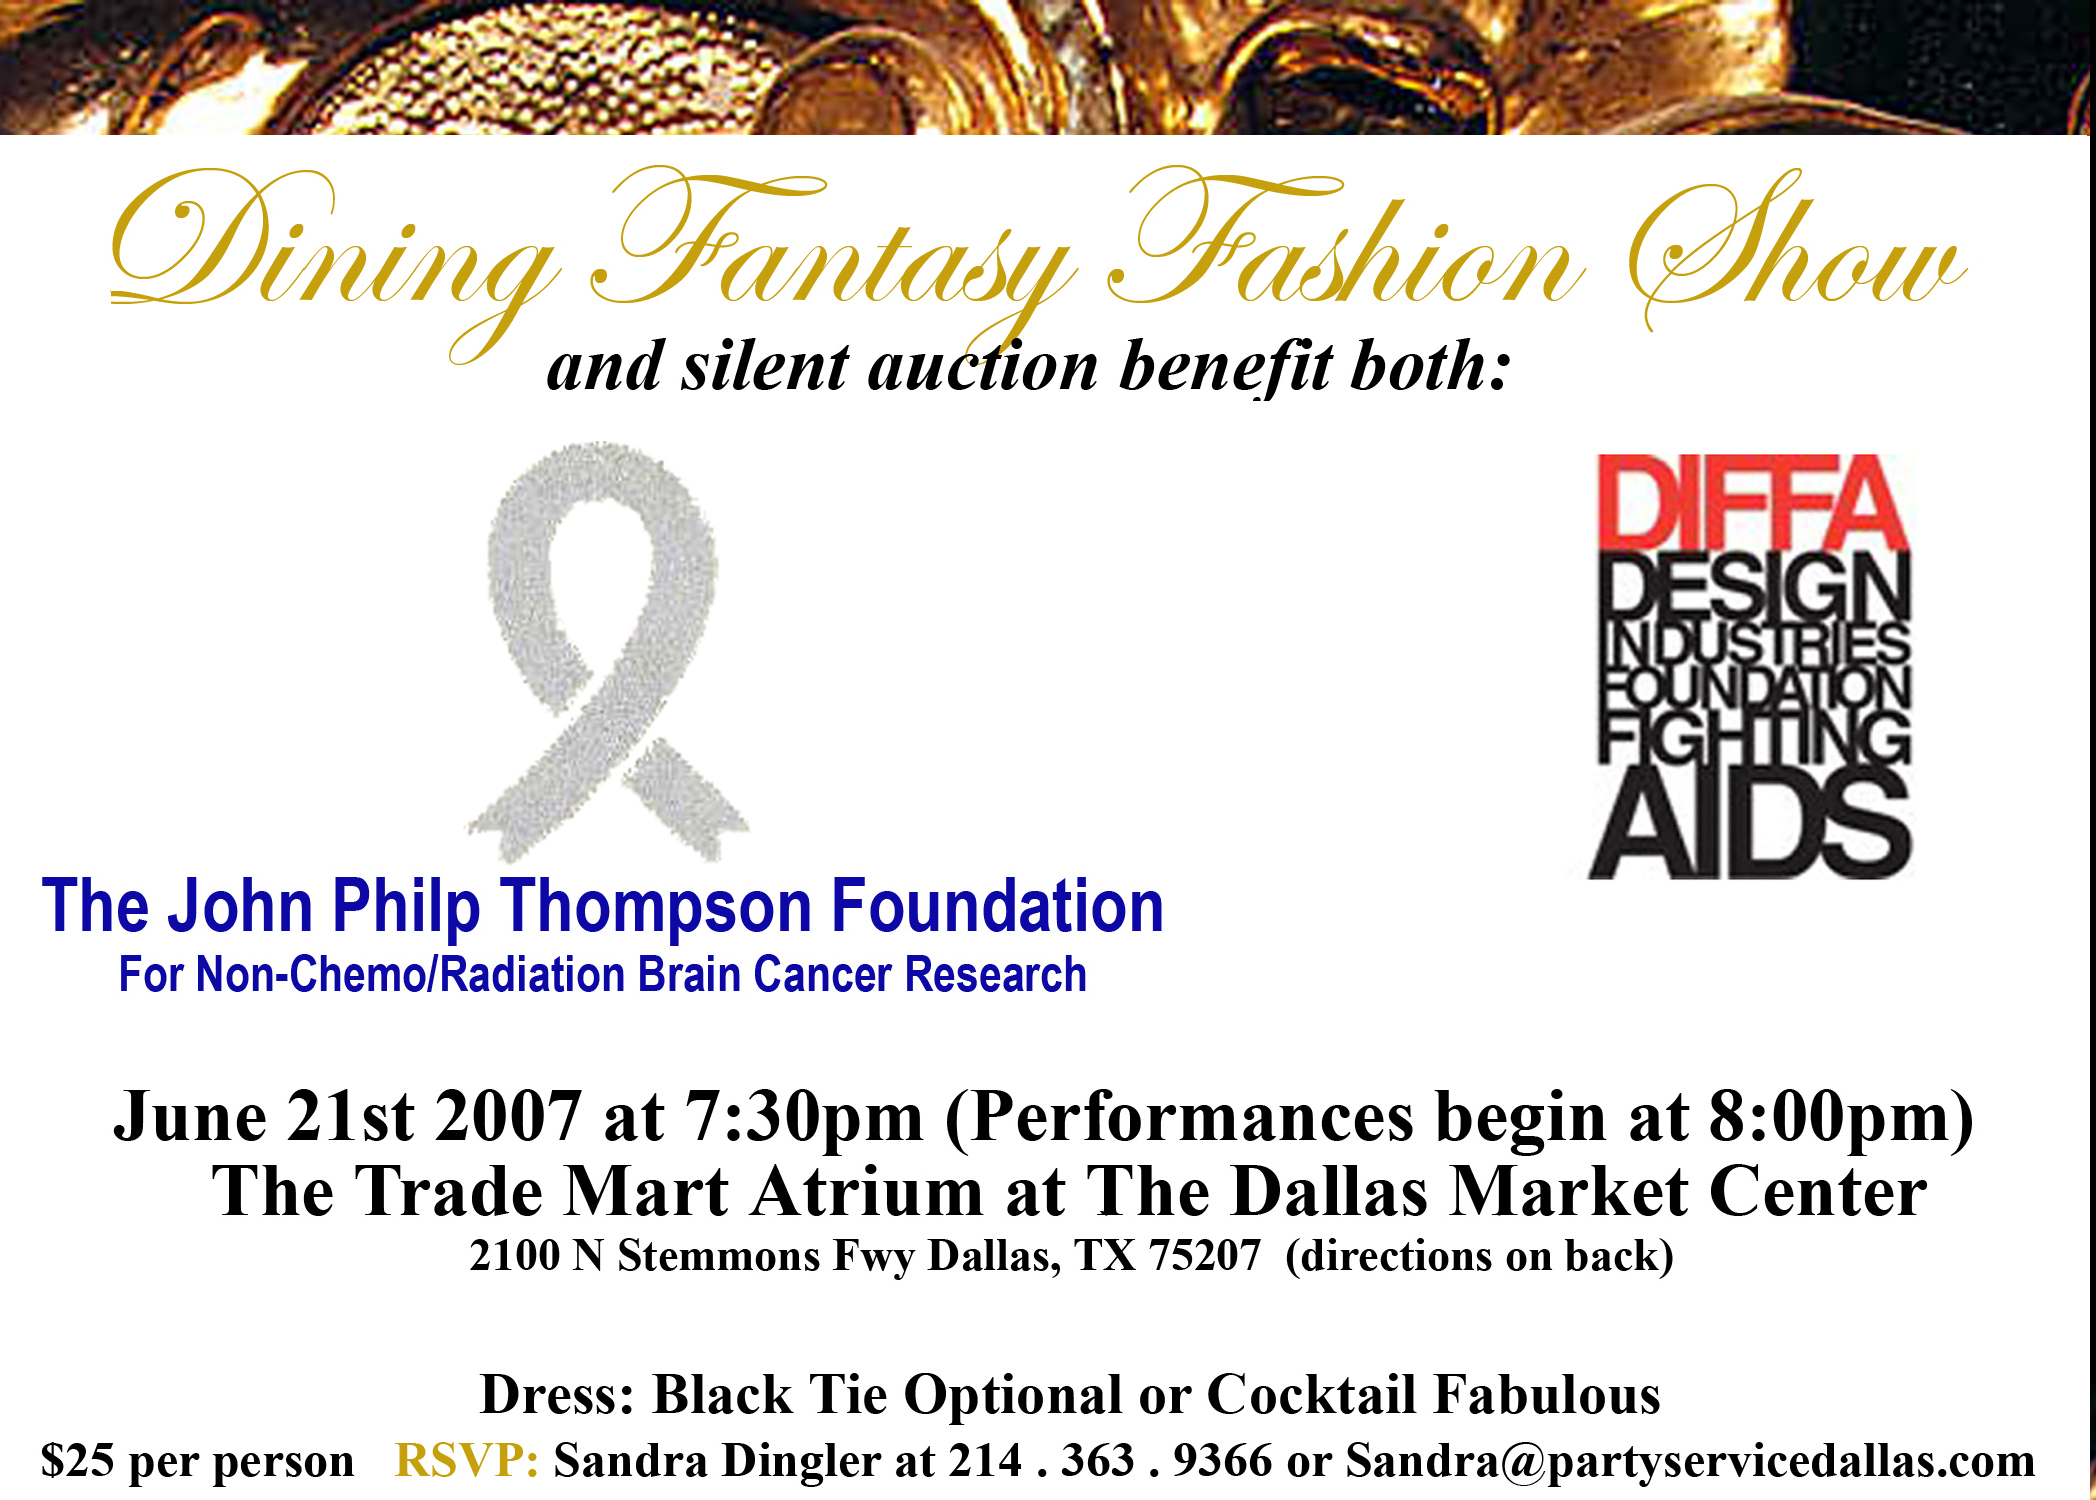 Click here to learn more about the Dining Fantasy Fashion Show and Silent Auction benefitting both The John Philp Thompson Foundation For Non-Chemo/Radiation Brain Cancer Research & Design Industries Foundation Fighting AIDS on June 21st 2007 at 7:30pm (Performances begin at 8:00pm) at The Trade Mart Atrium at The Dallas Market Center located at 2100 N. Stemmons FWY Dallas, TX 75207 RSVP Sandra Dingler at (214)363-9366.